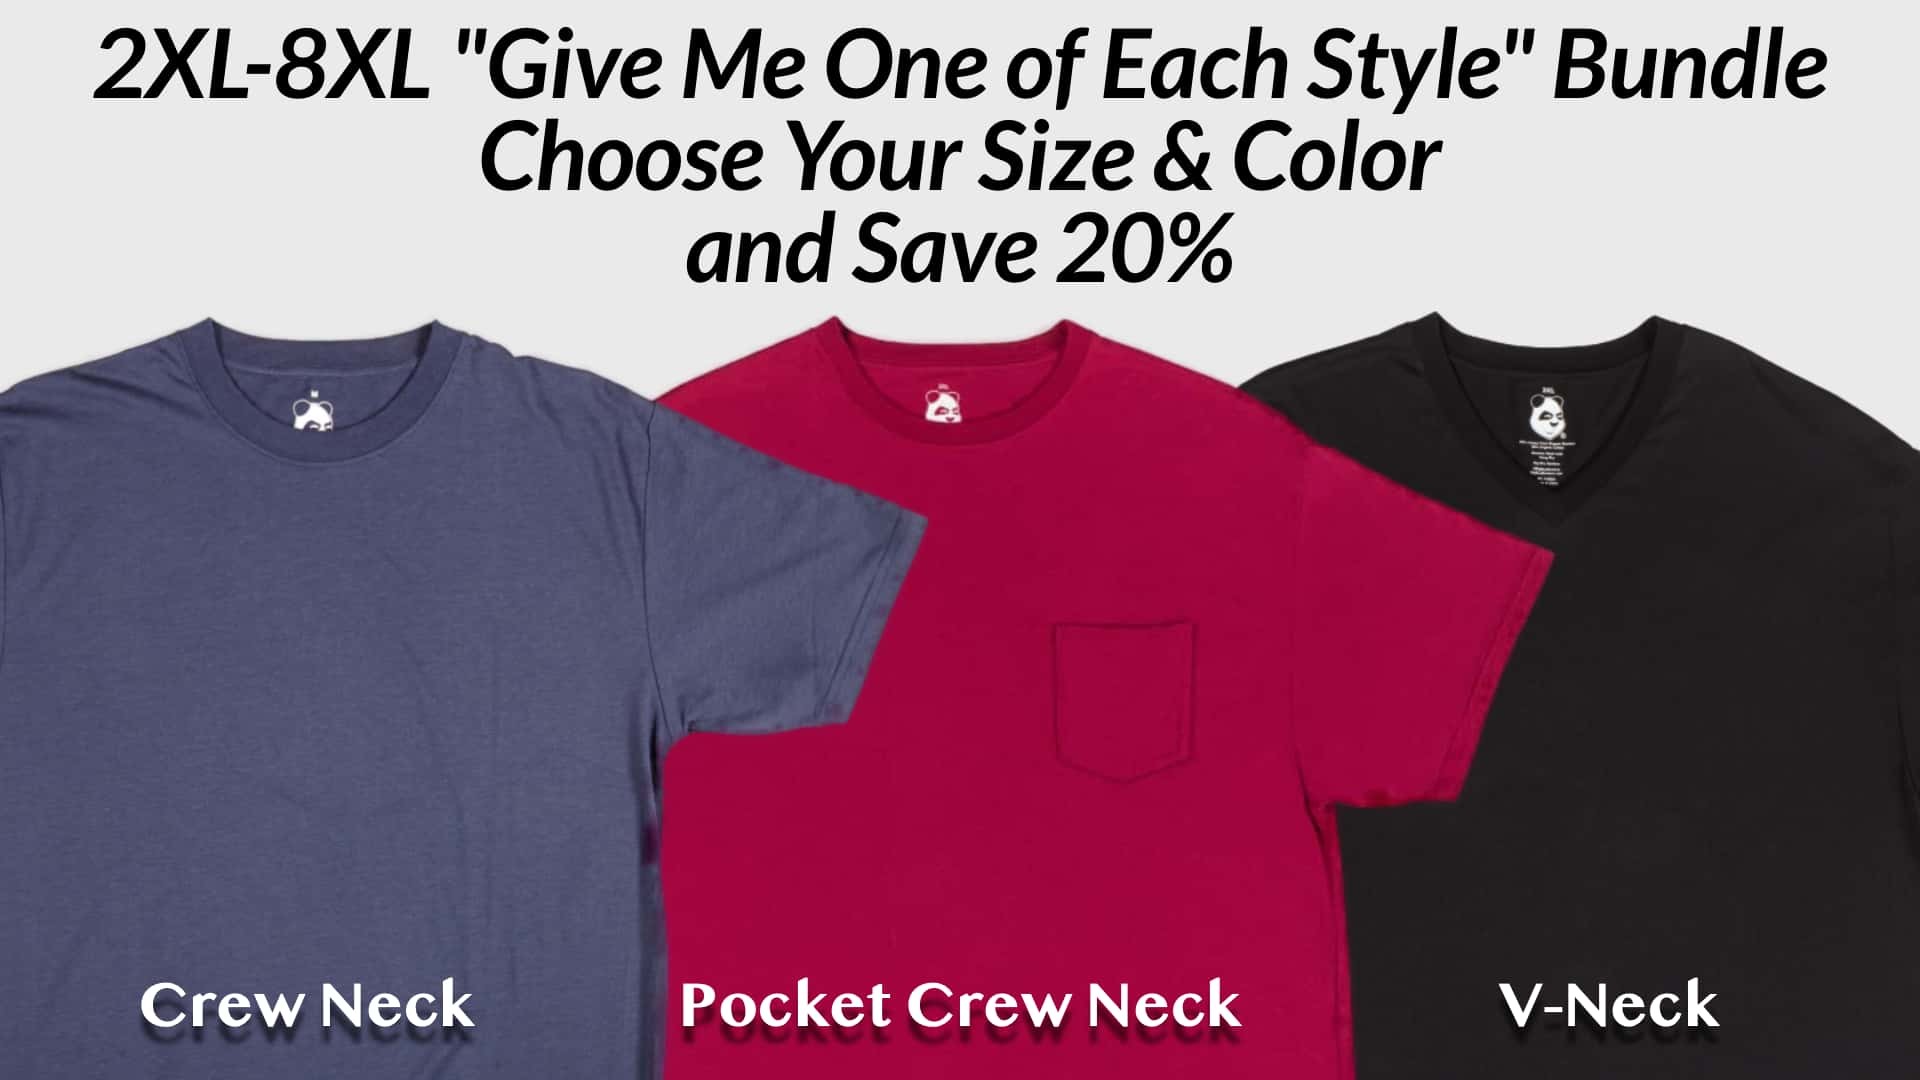 The 2XL-8XL "Give Me One Of Each Style" Bundle of Bamboo Viscose T-Shirts